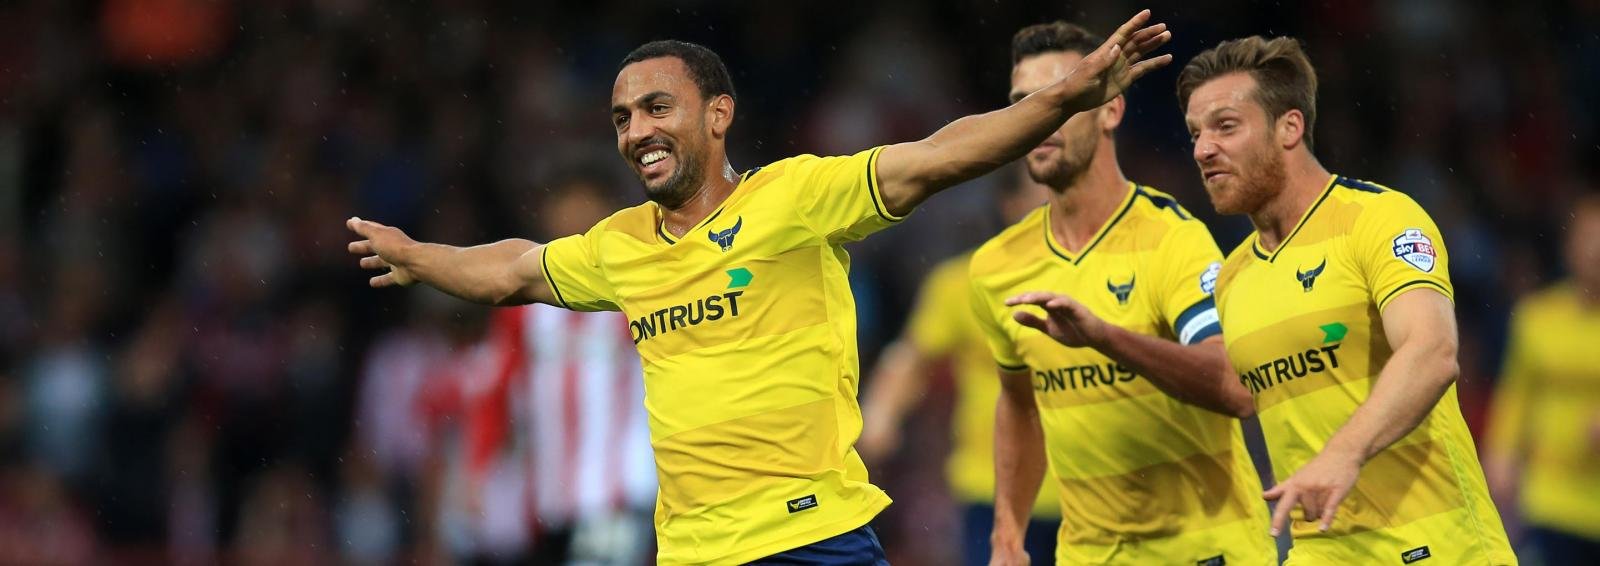 Round-up: League Two – Oxford defeat leaders Plymouth